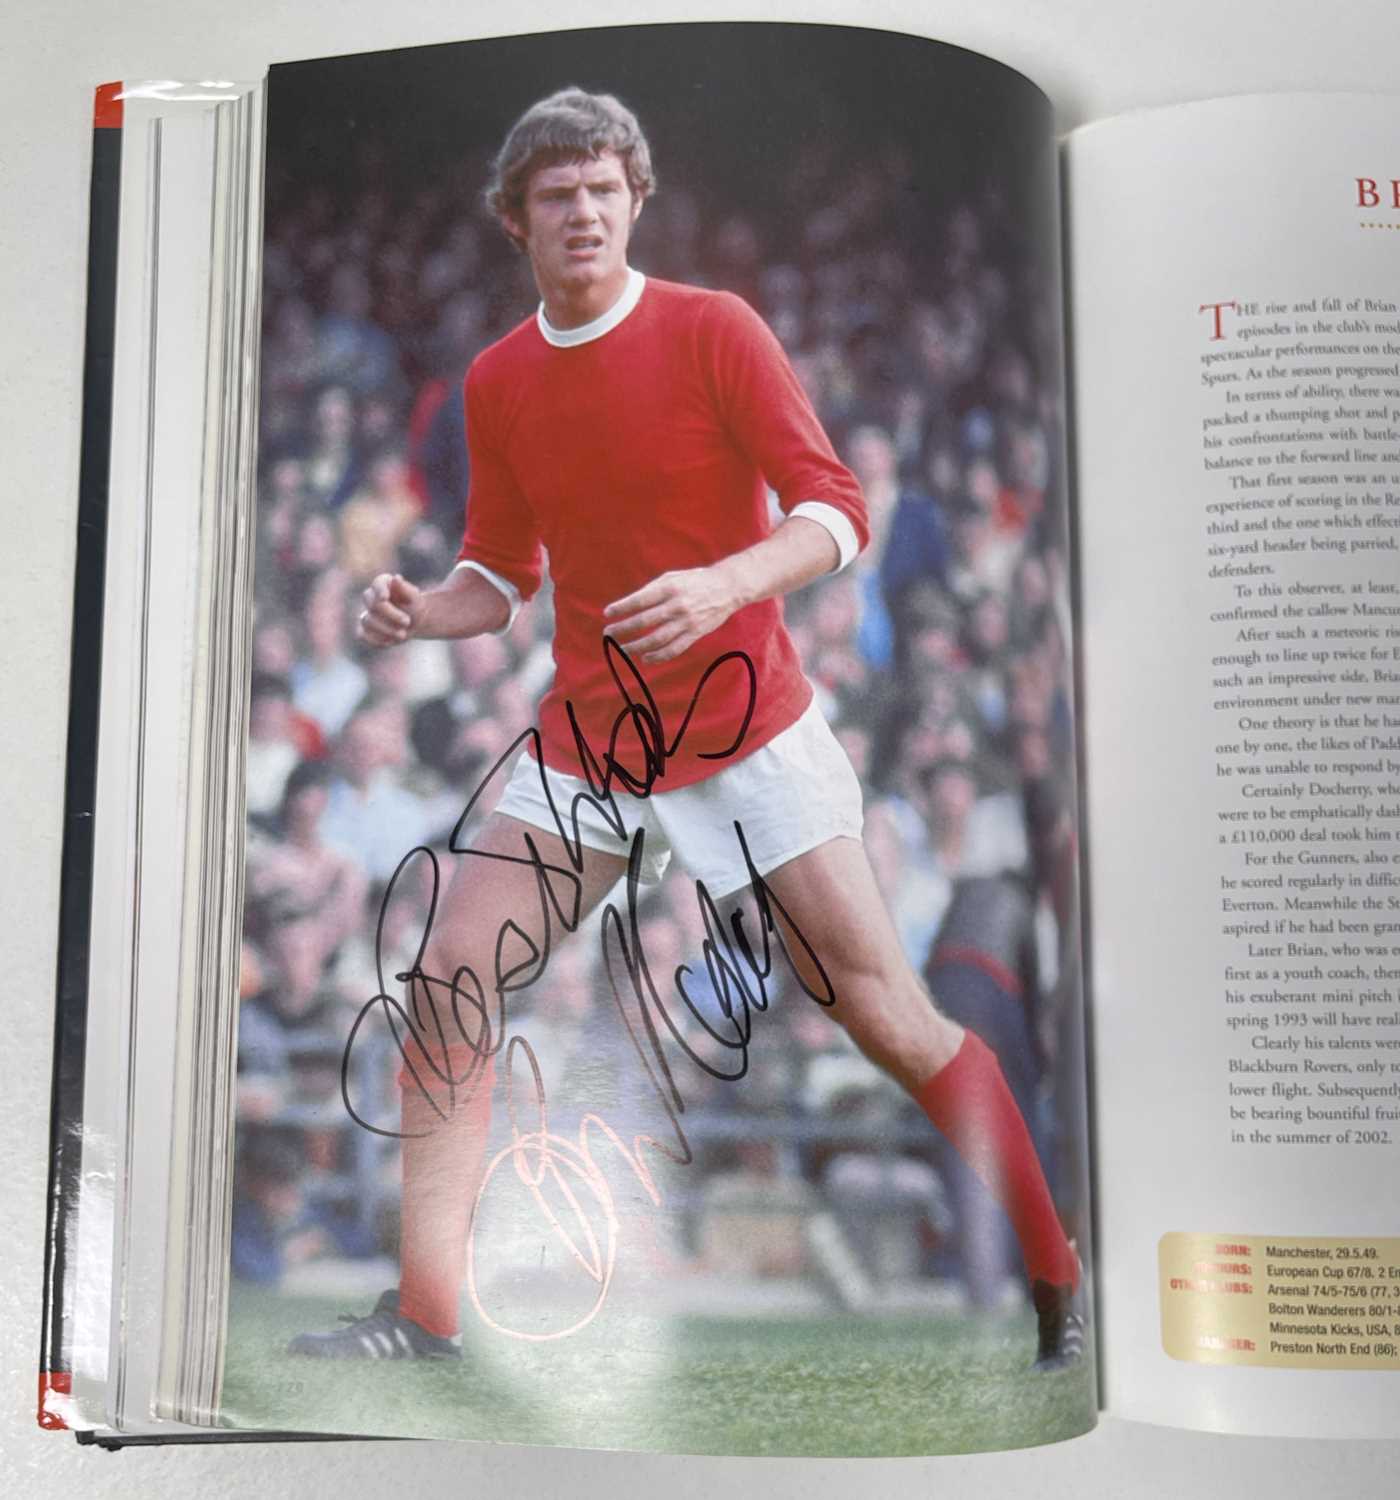 FOOTBALL MEMORABILIA - MANCHESTER UNITED MULTI SIGNED 'PLAYER BY PLAYER' BOOK. - Image 13 of 50